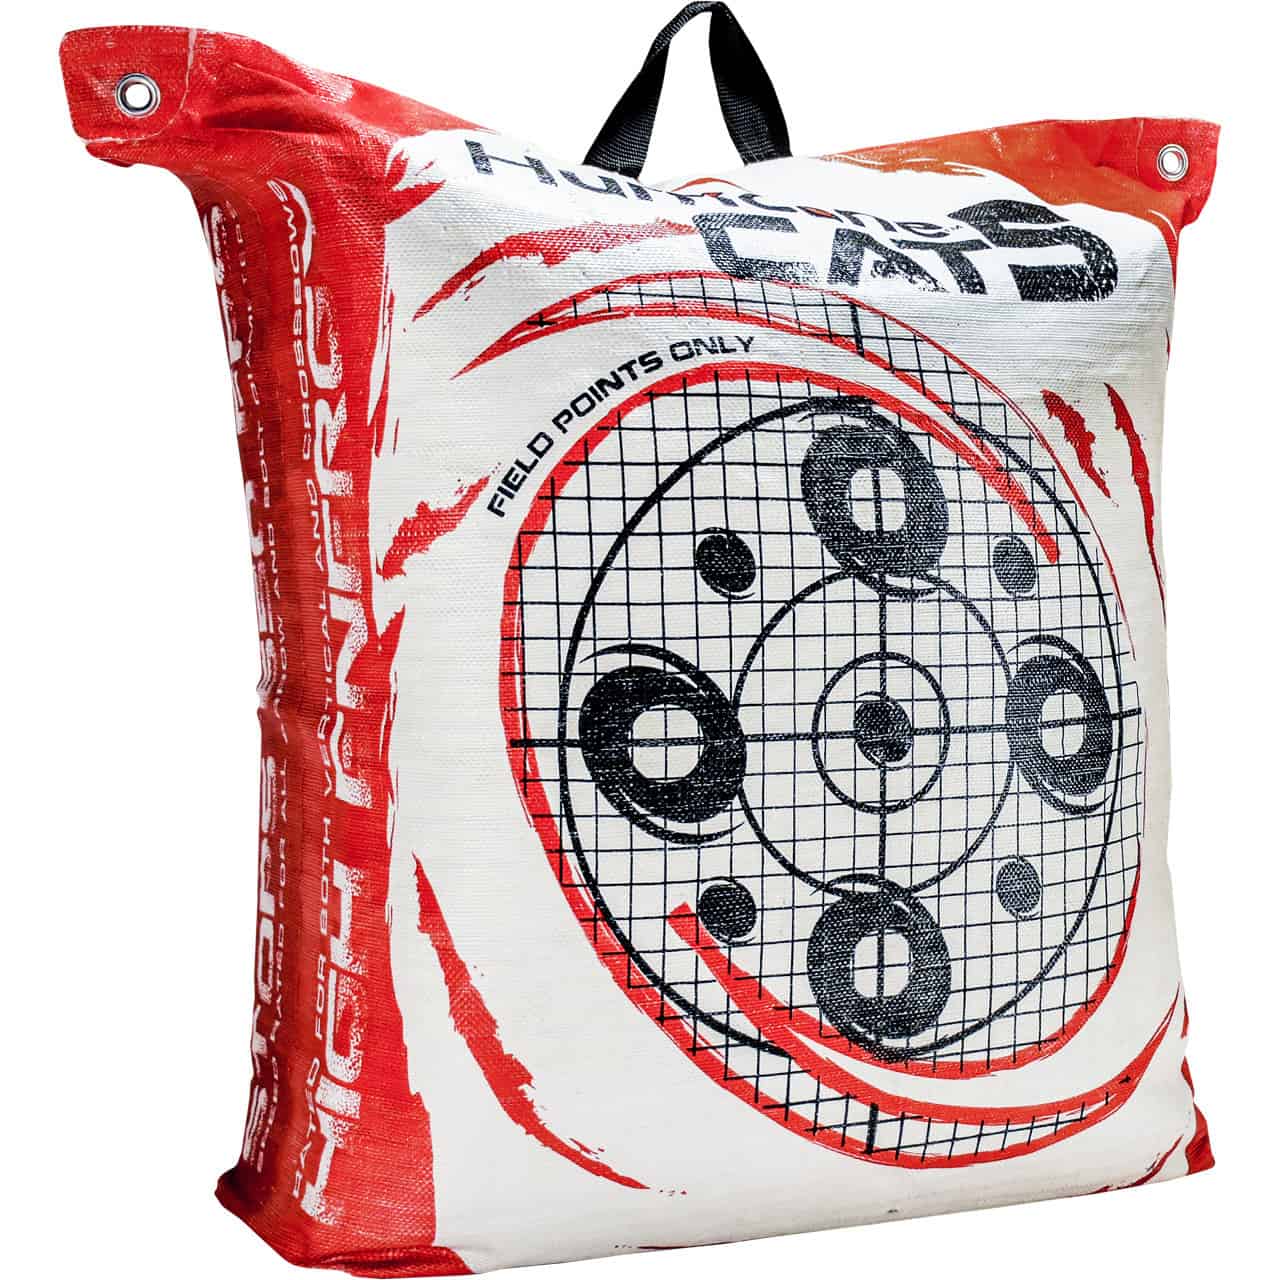 Hurricane Cat 5 Bag Target Front Right